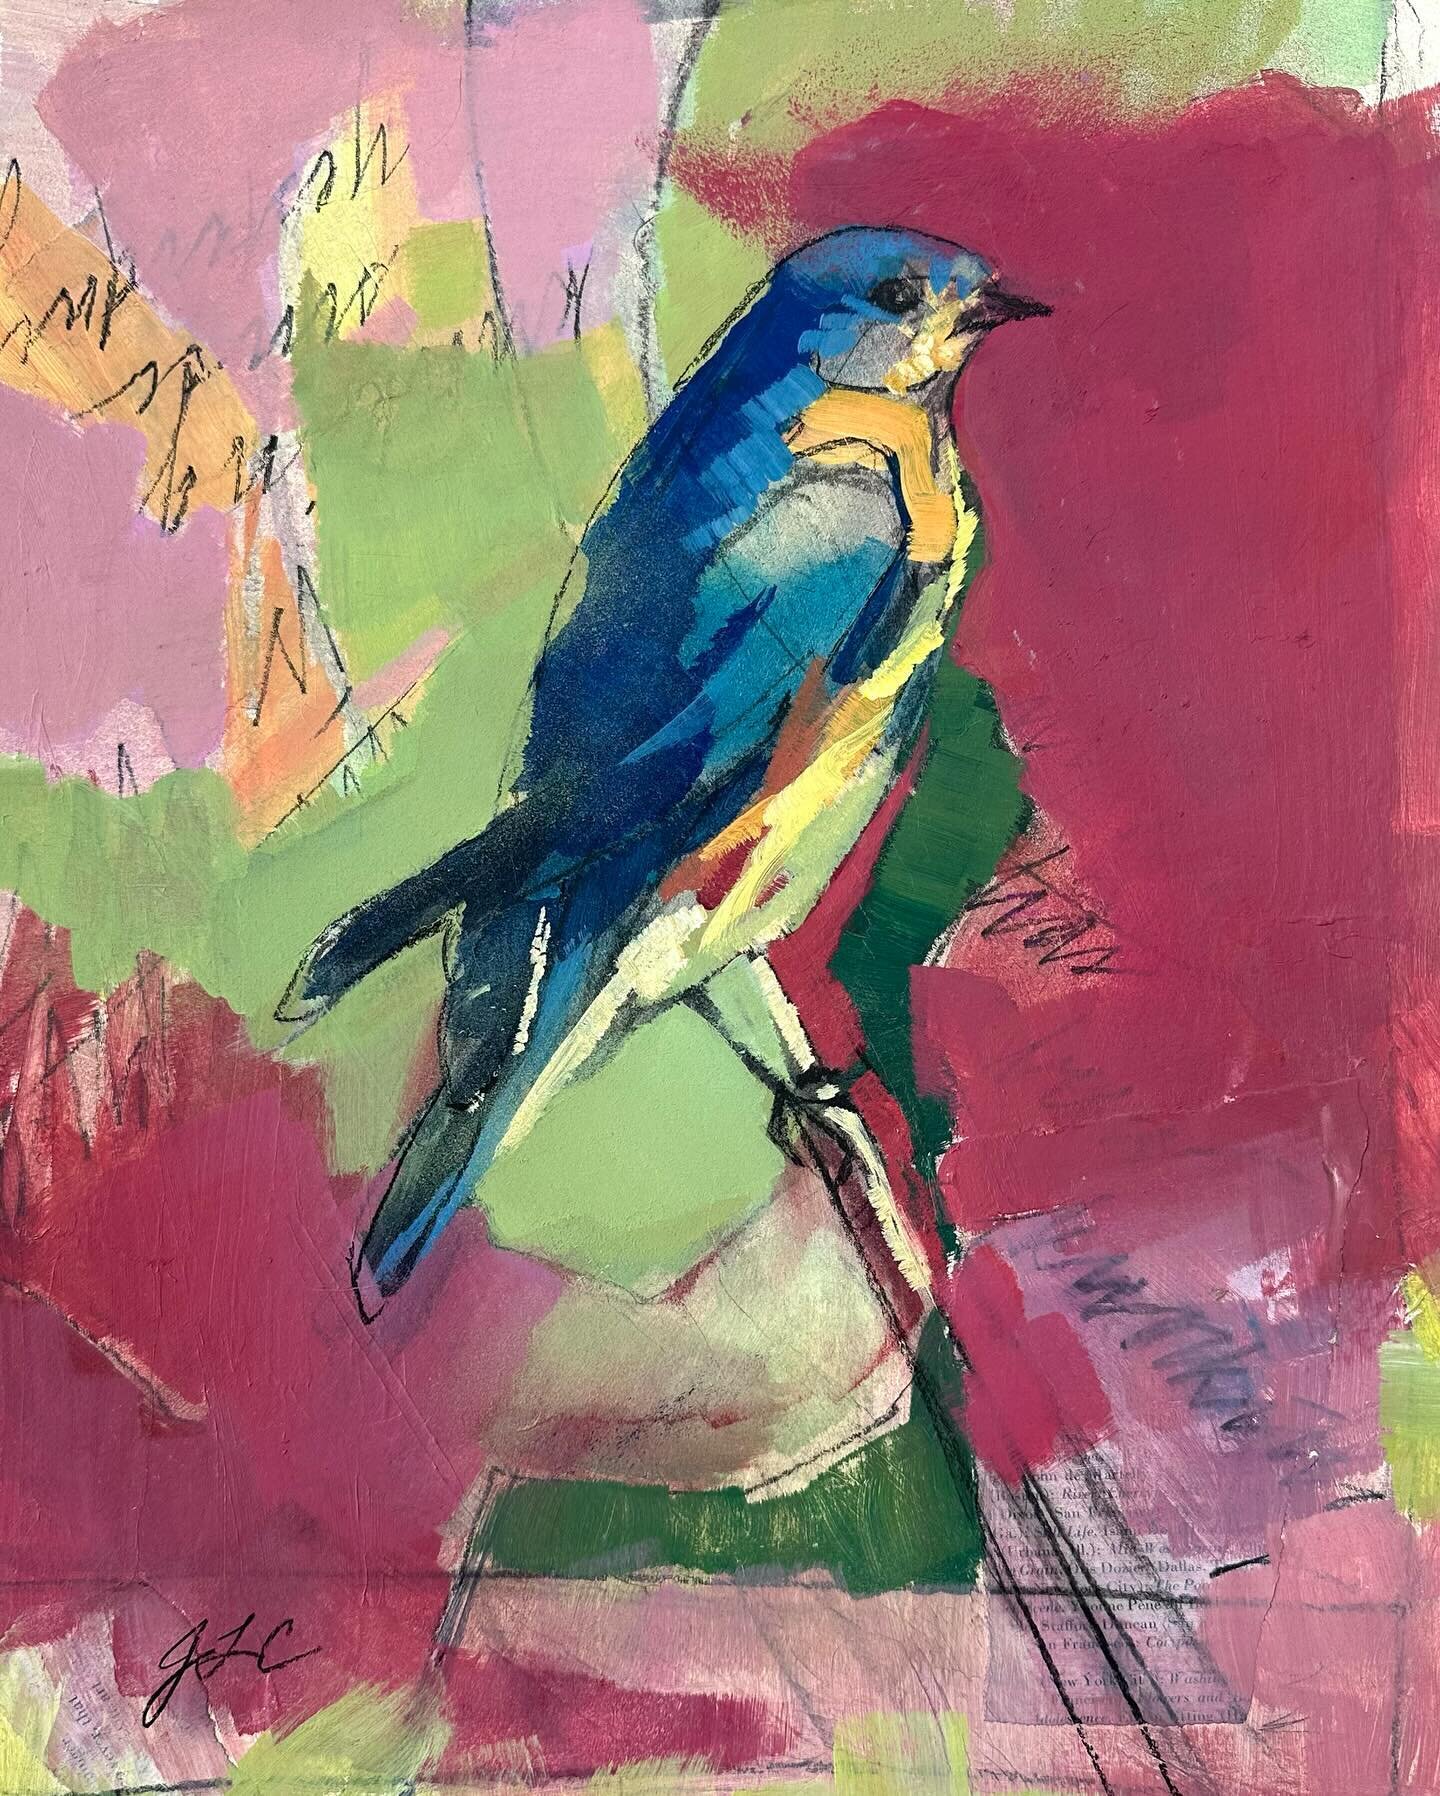 I needed a little mood-brightening, so I painted bluebirds, which can symbolize hope and the promise of brighter days. Each artwork includes little bits of poetry from Pablo Neruda about the future and its possibilities. I wrote the original Spanish 